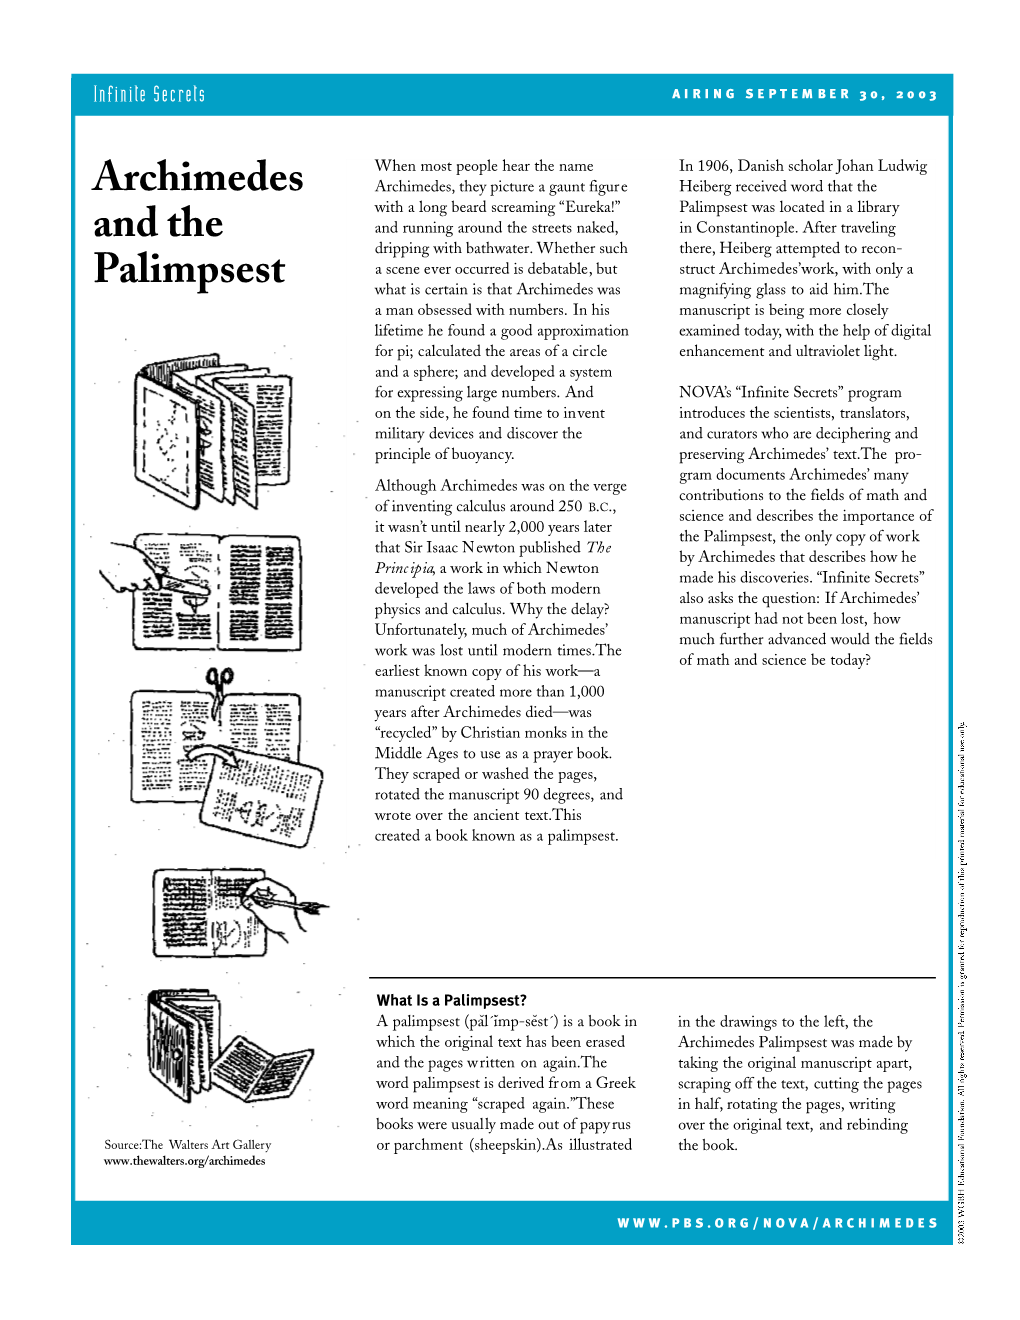 Archimedes and the Palimpsest